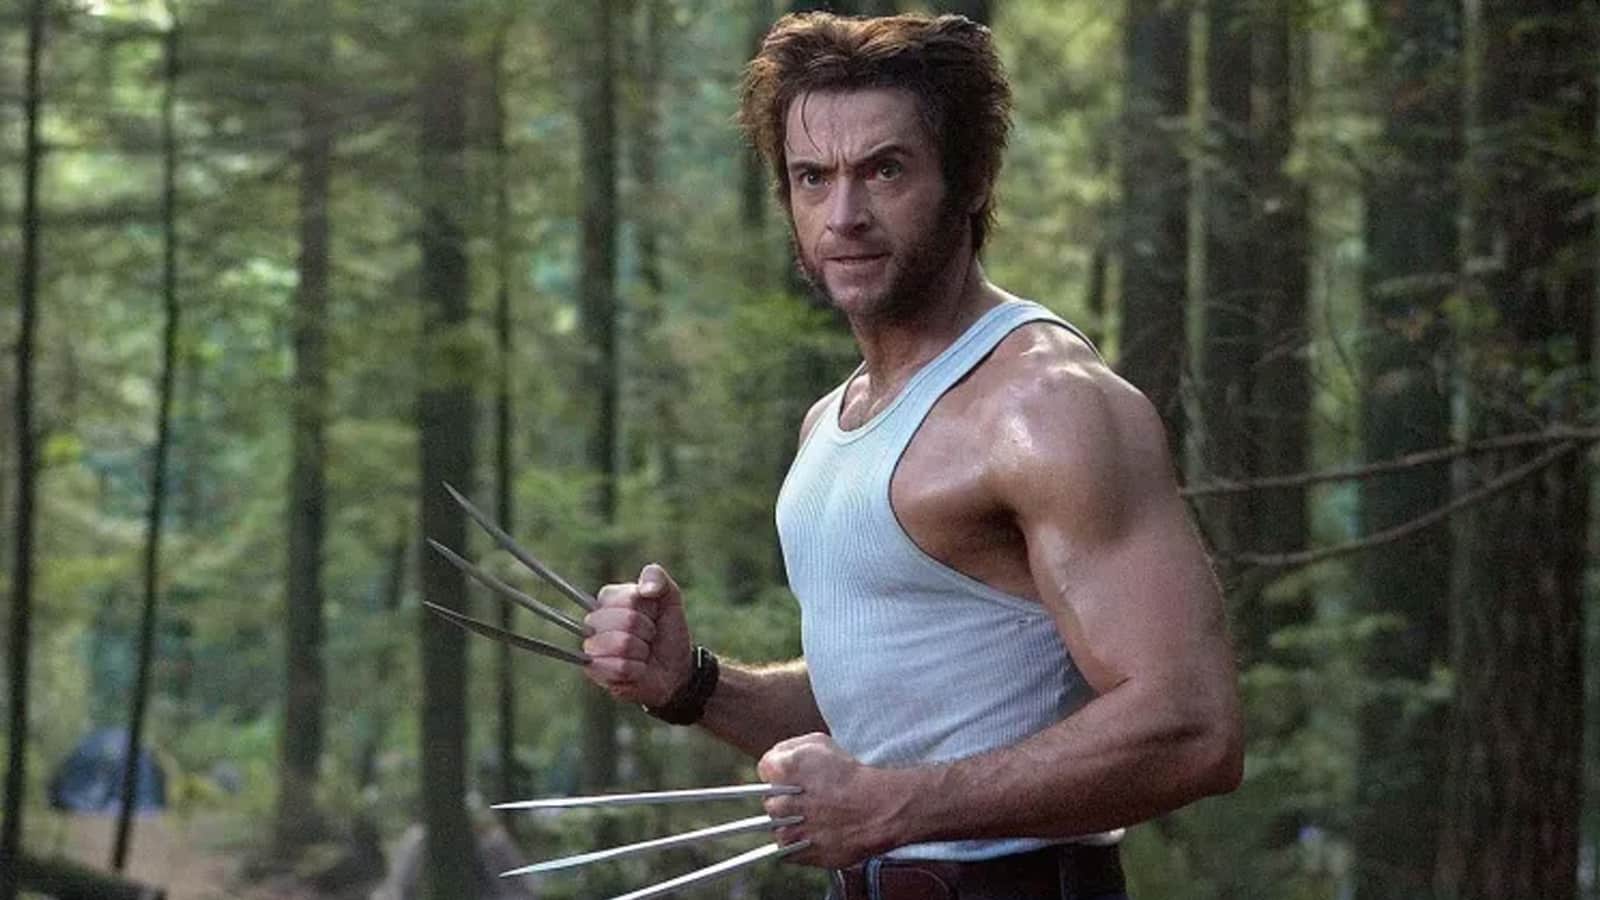 An image of Hugh Jackman as Wolverine in X-Men The Last Stand